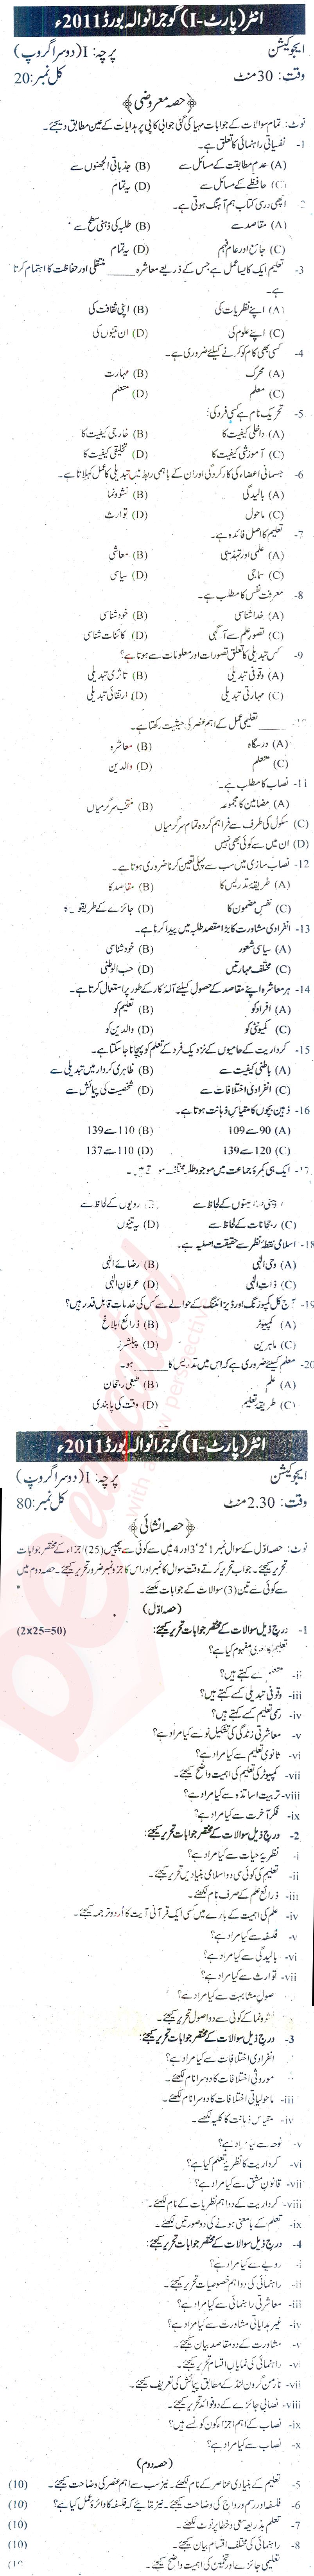 Education FA Part 1 Past Paper Group 2 BISE Gujranwala 2011